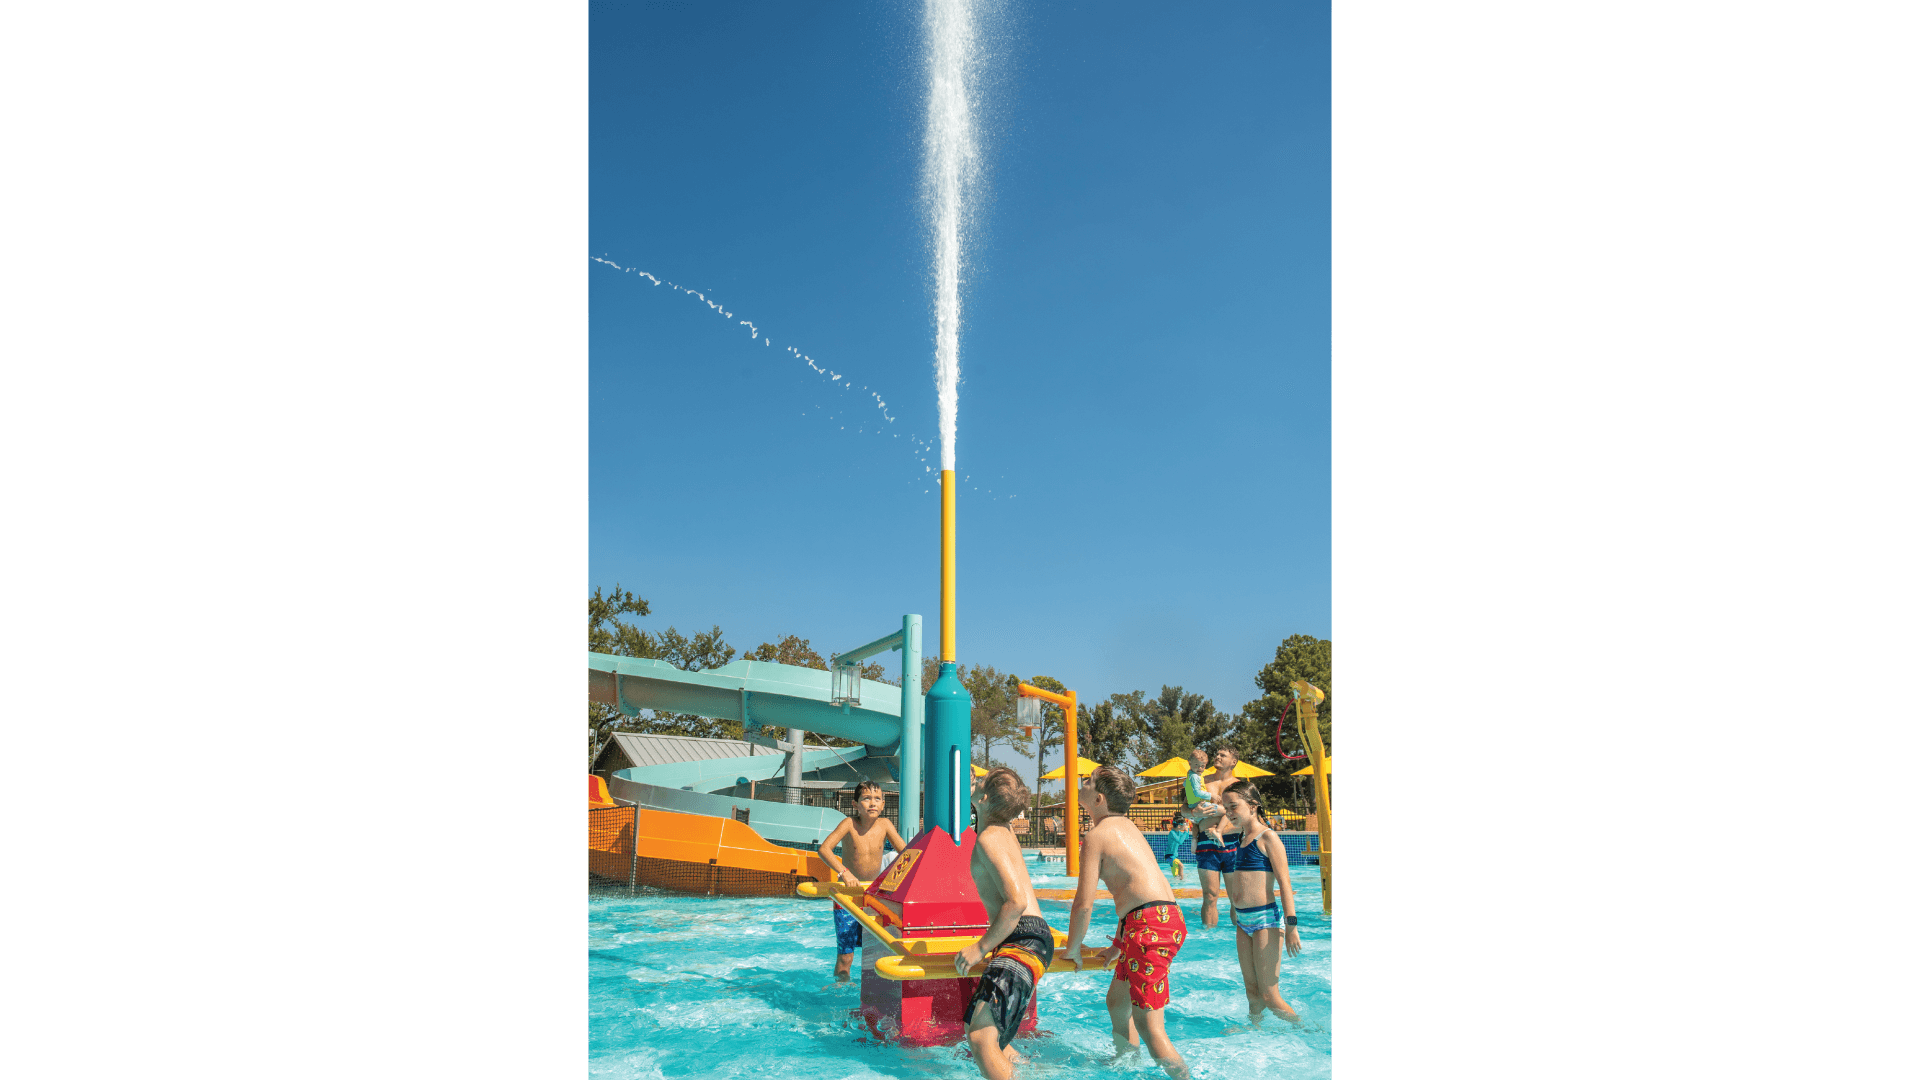 Kids working together to activate the rainmaker waterplay feature by Interactive Play as a large burst of water shoots into the sky.